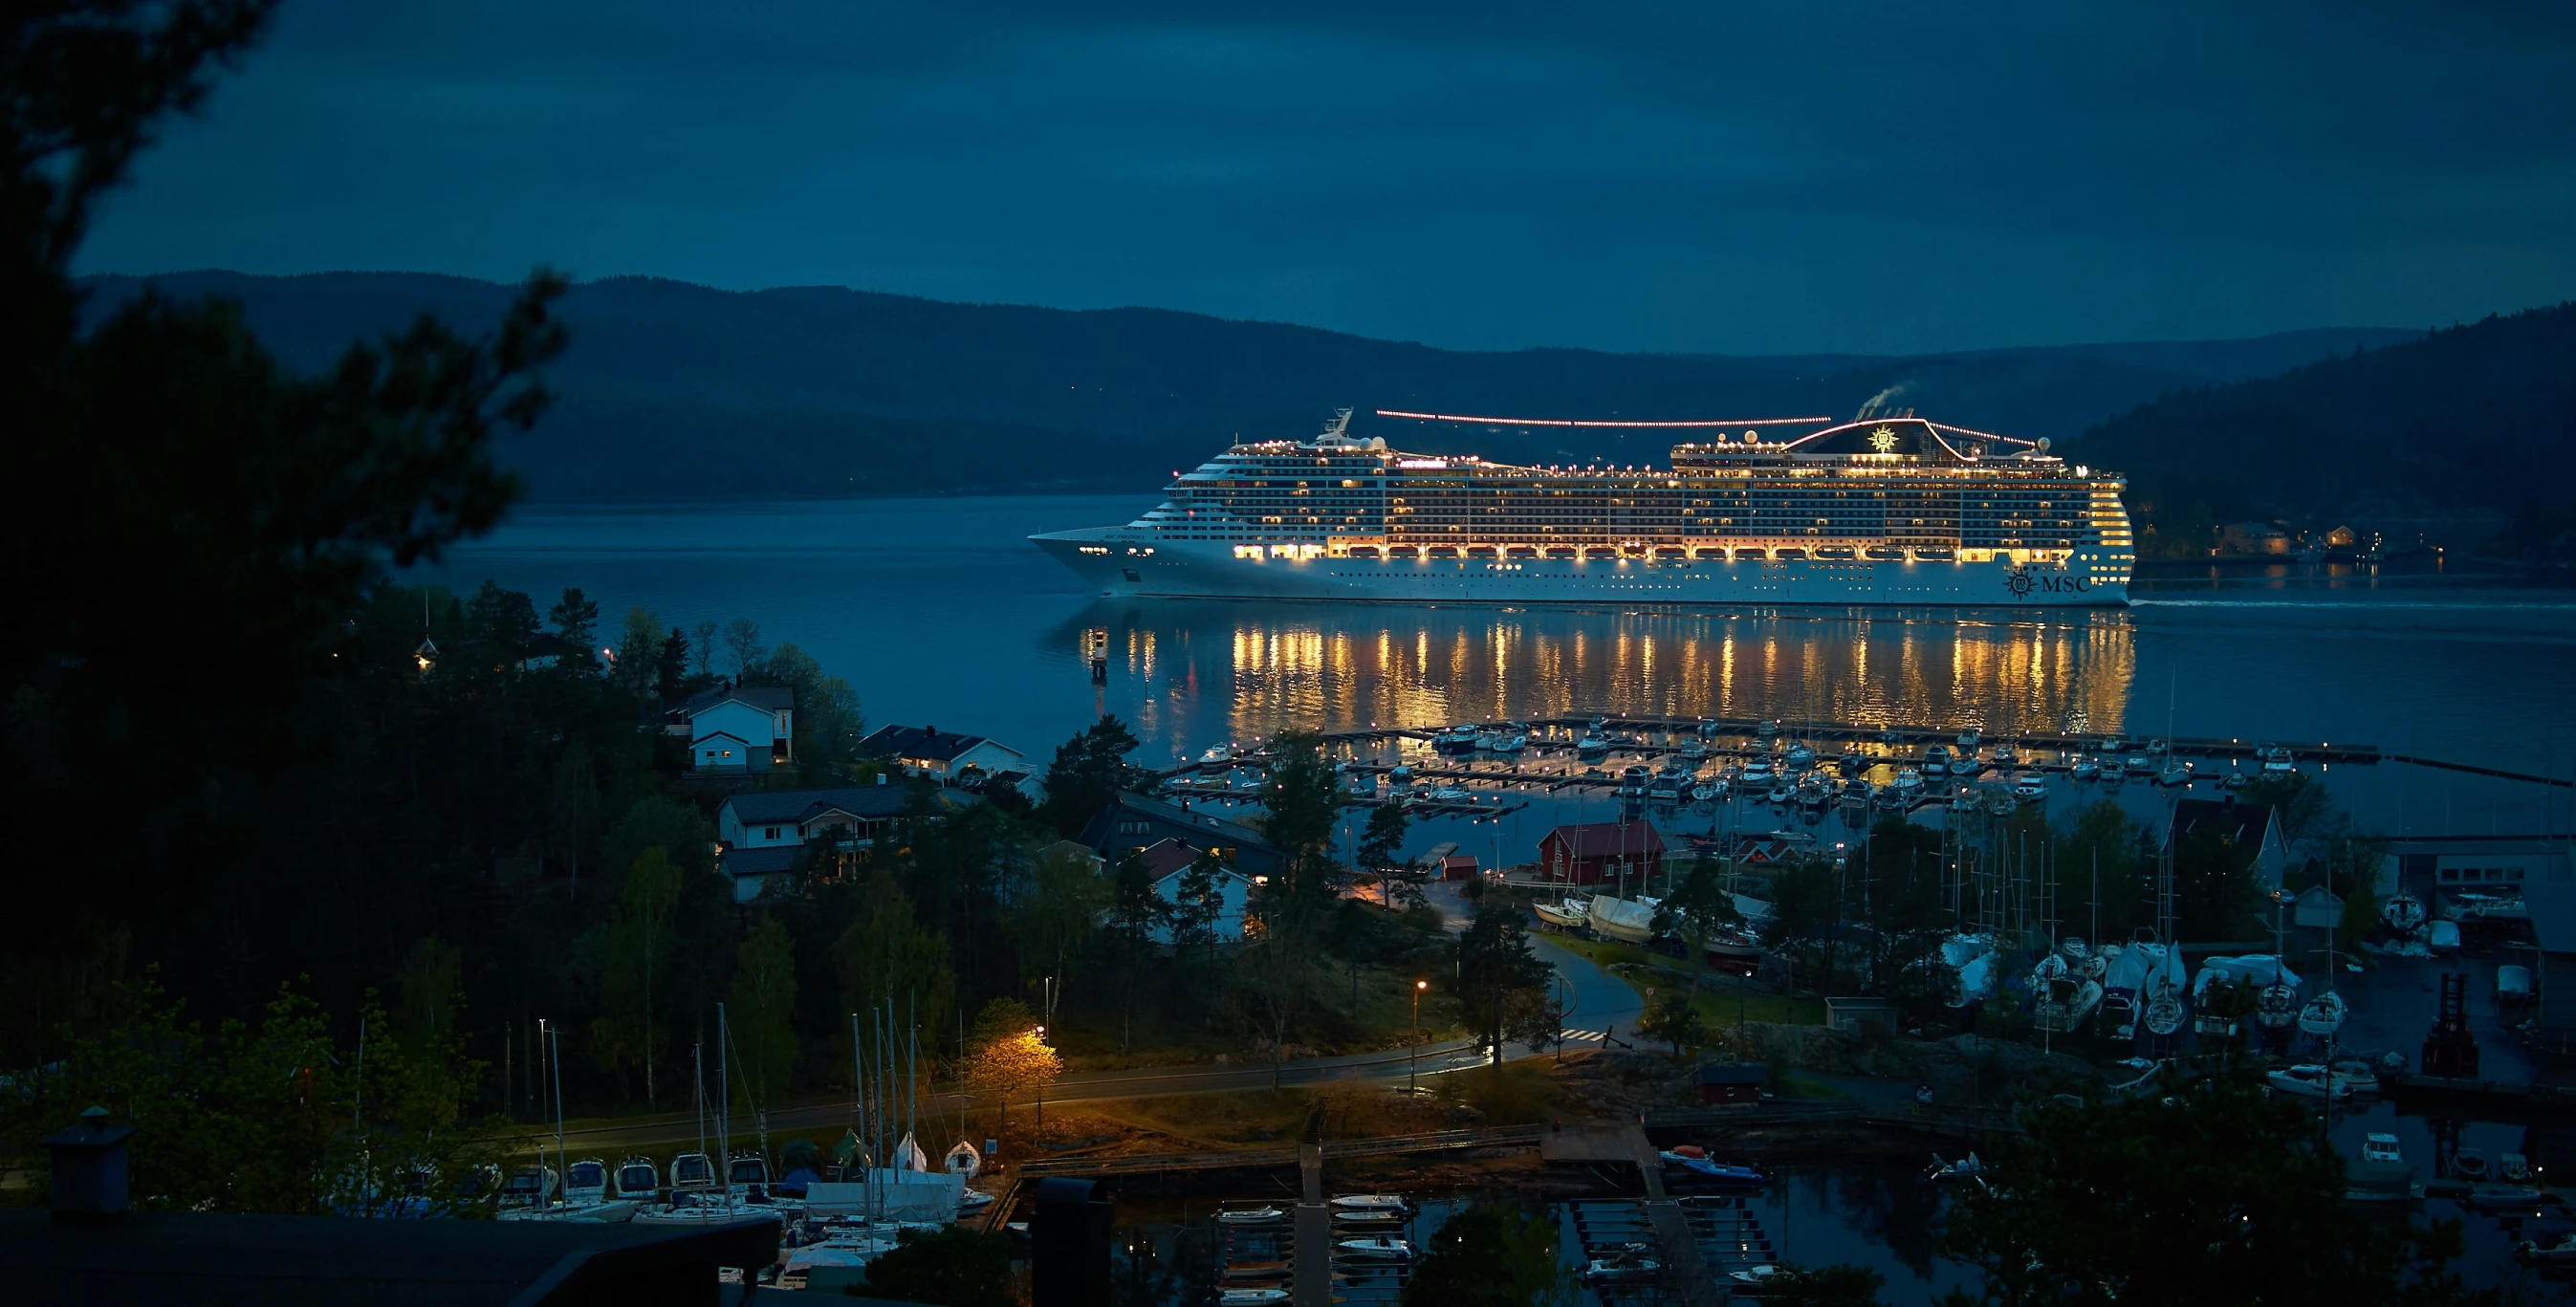 a cruise ship is seen at night with the lights on